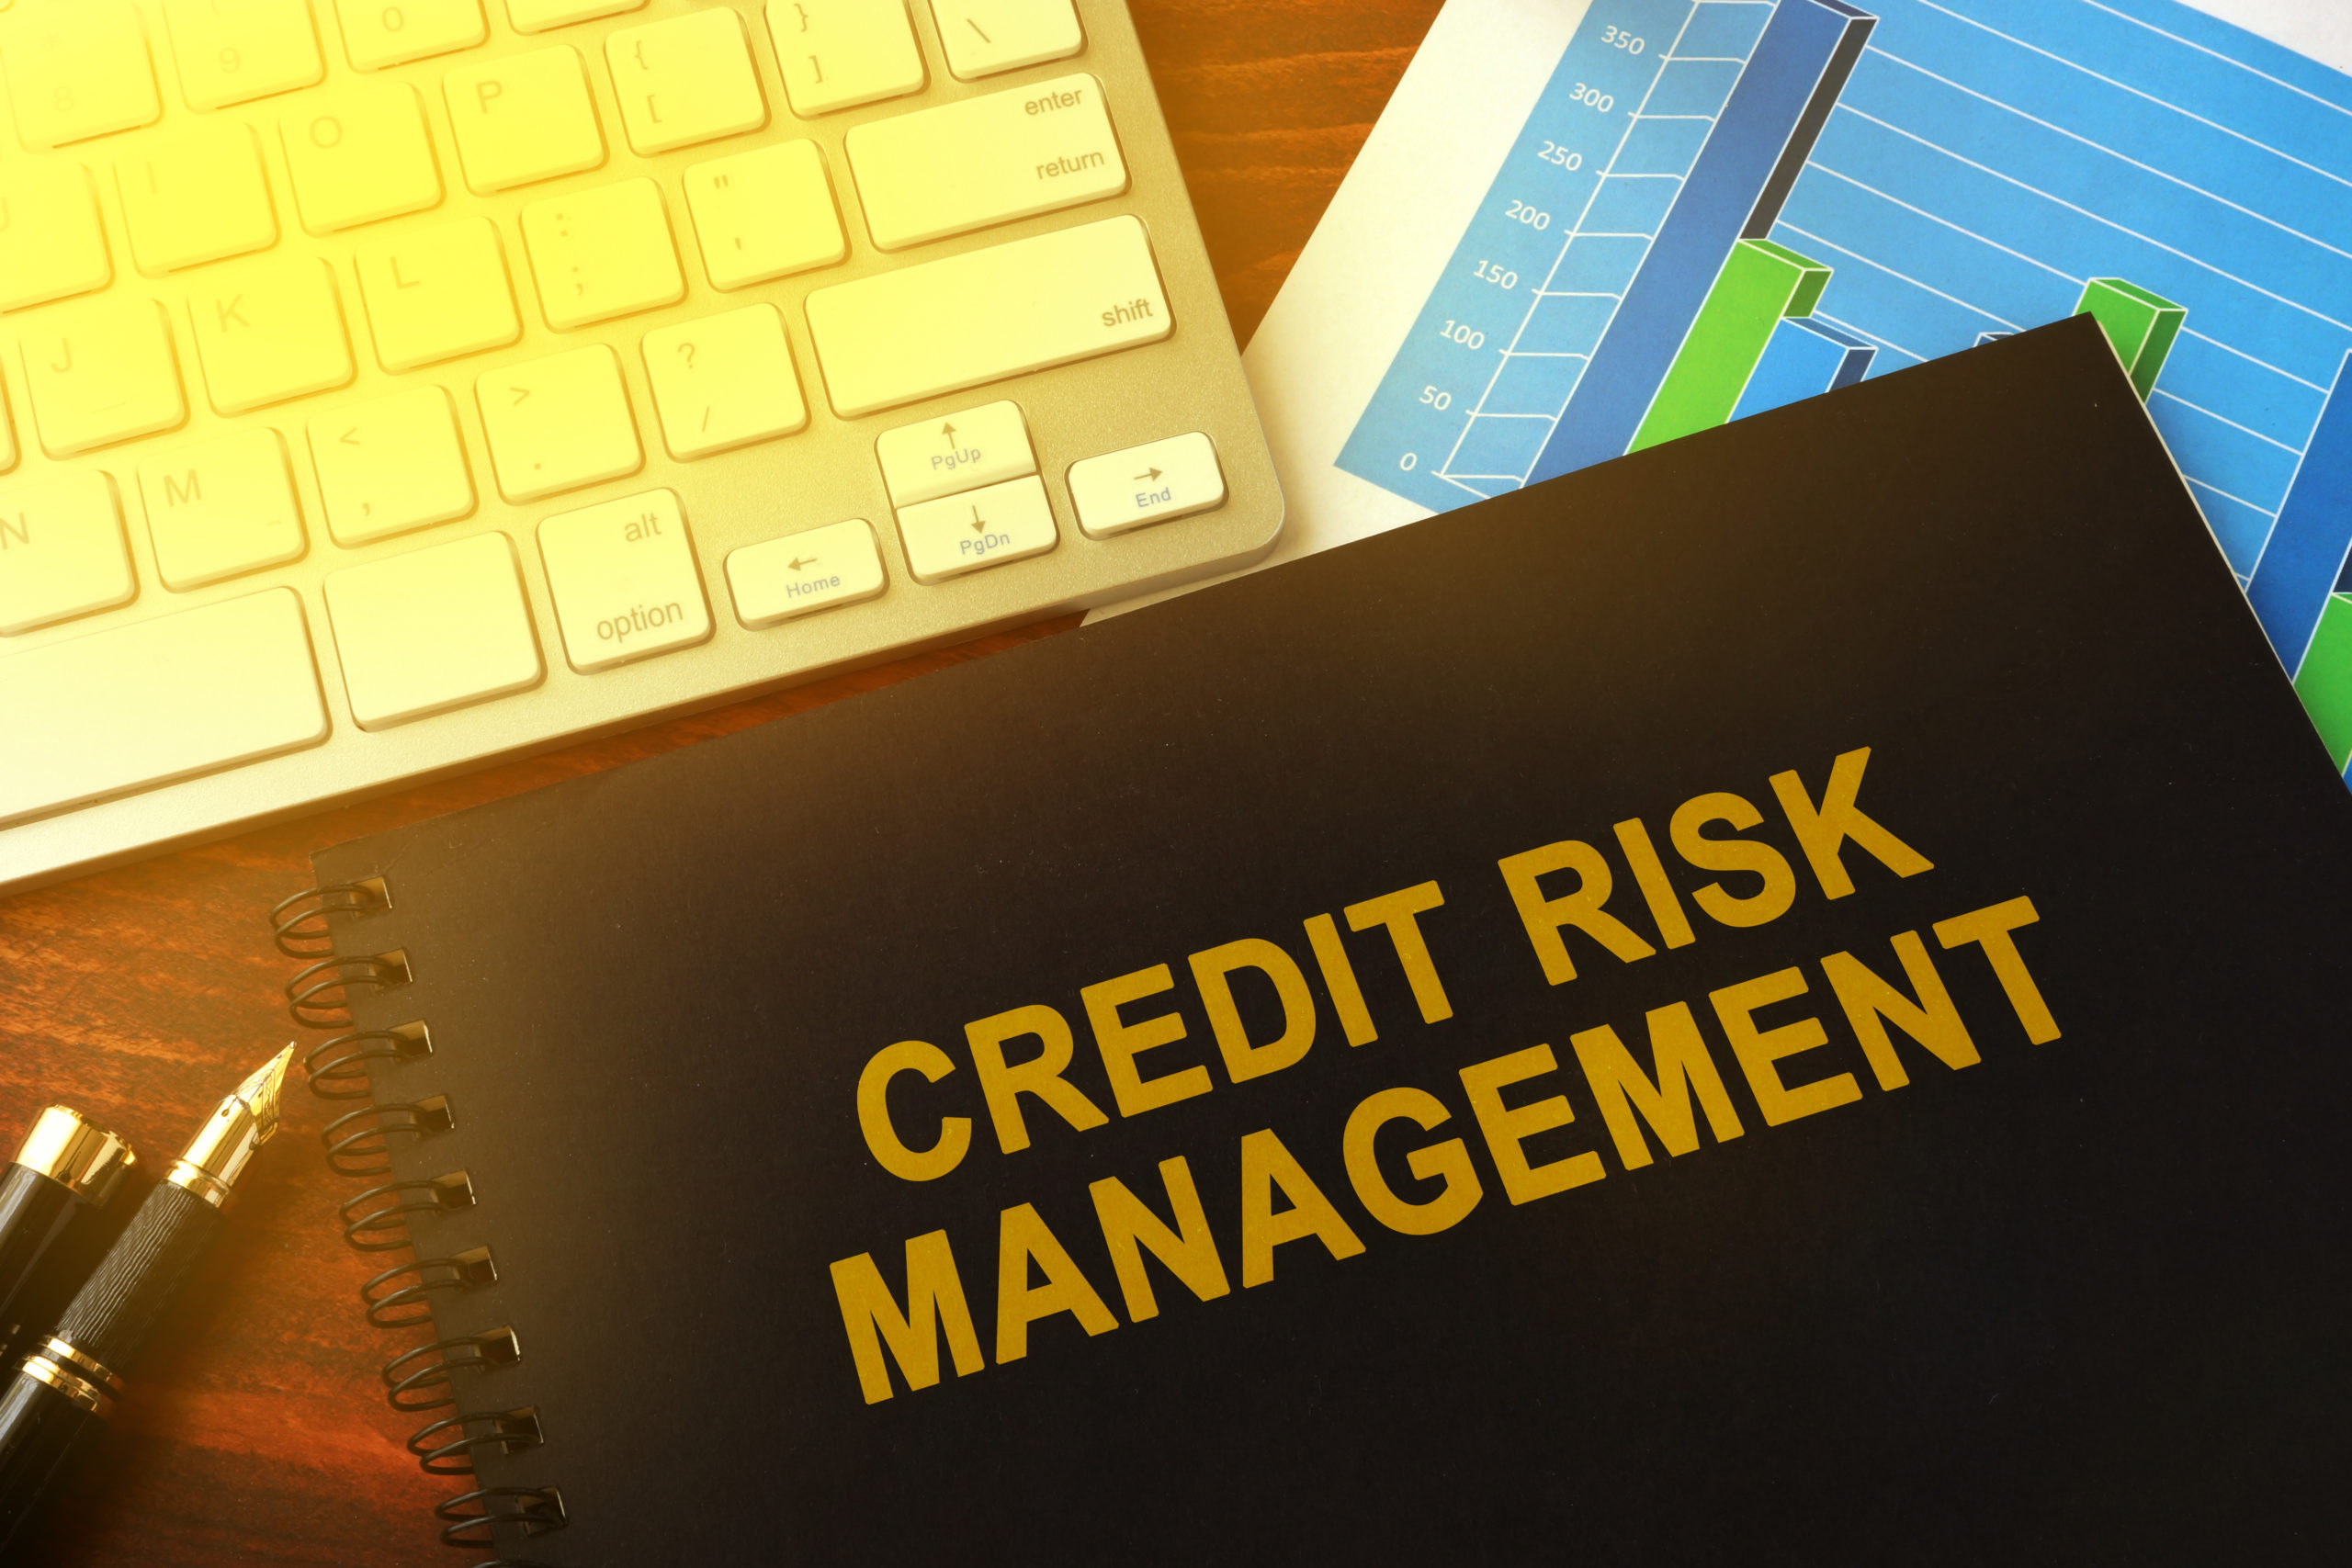 research on credit management